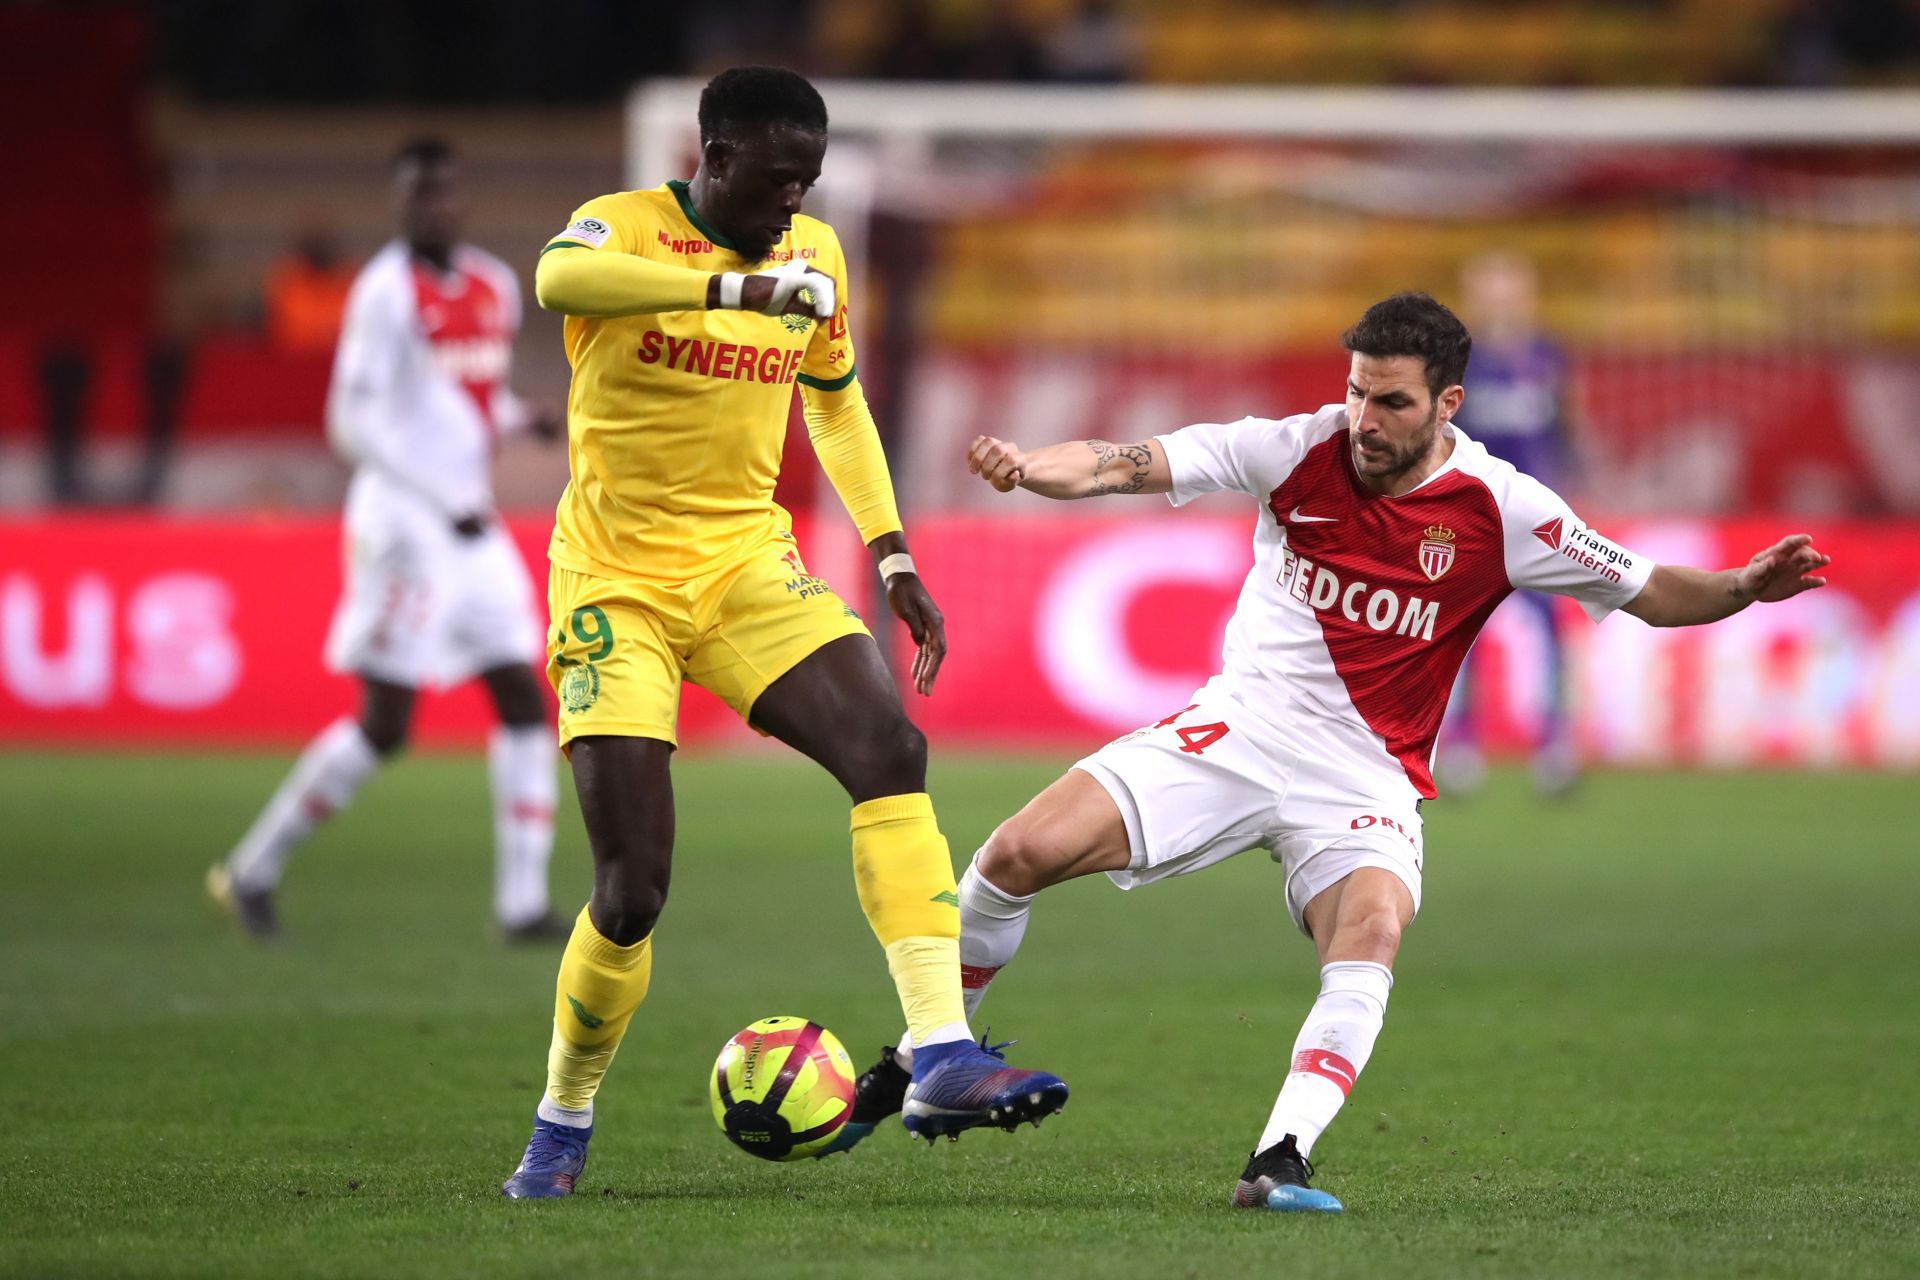 AS Monaco have a strong squad